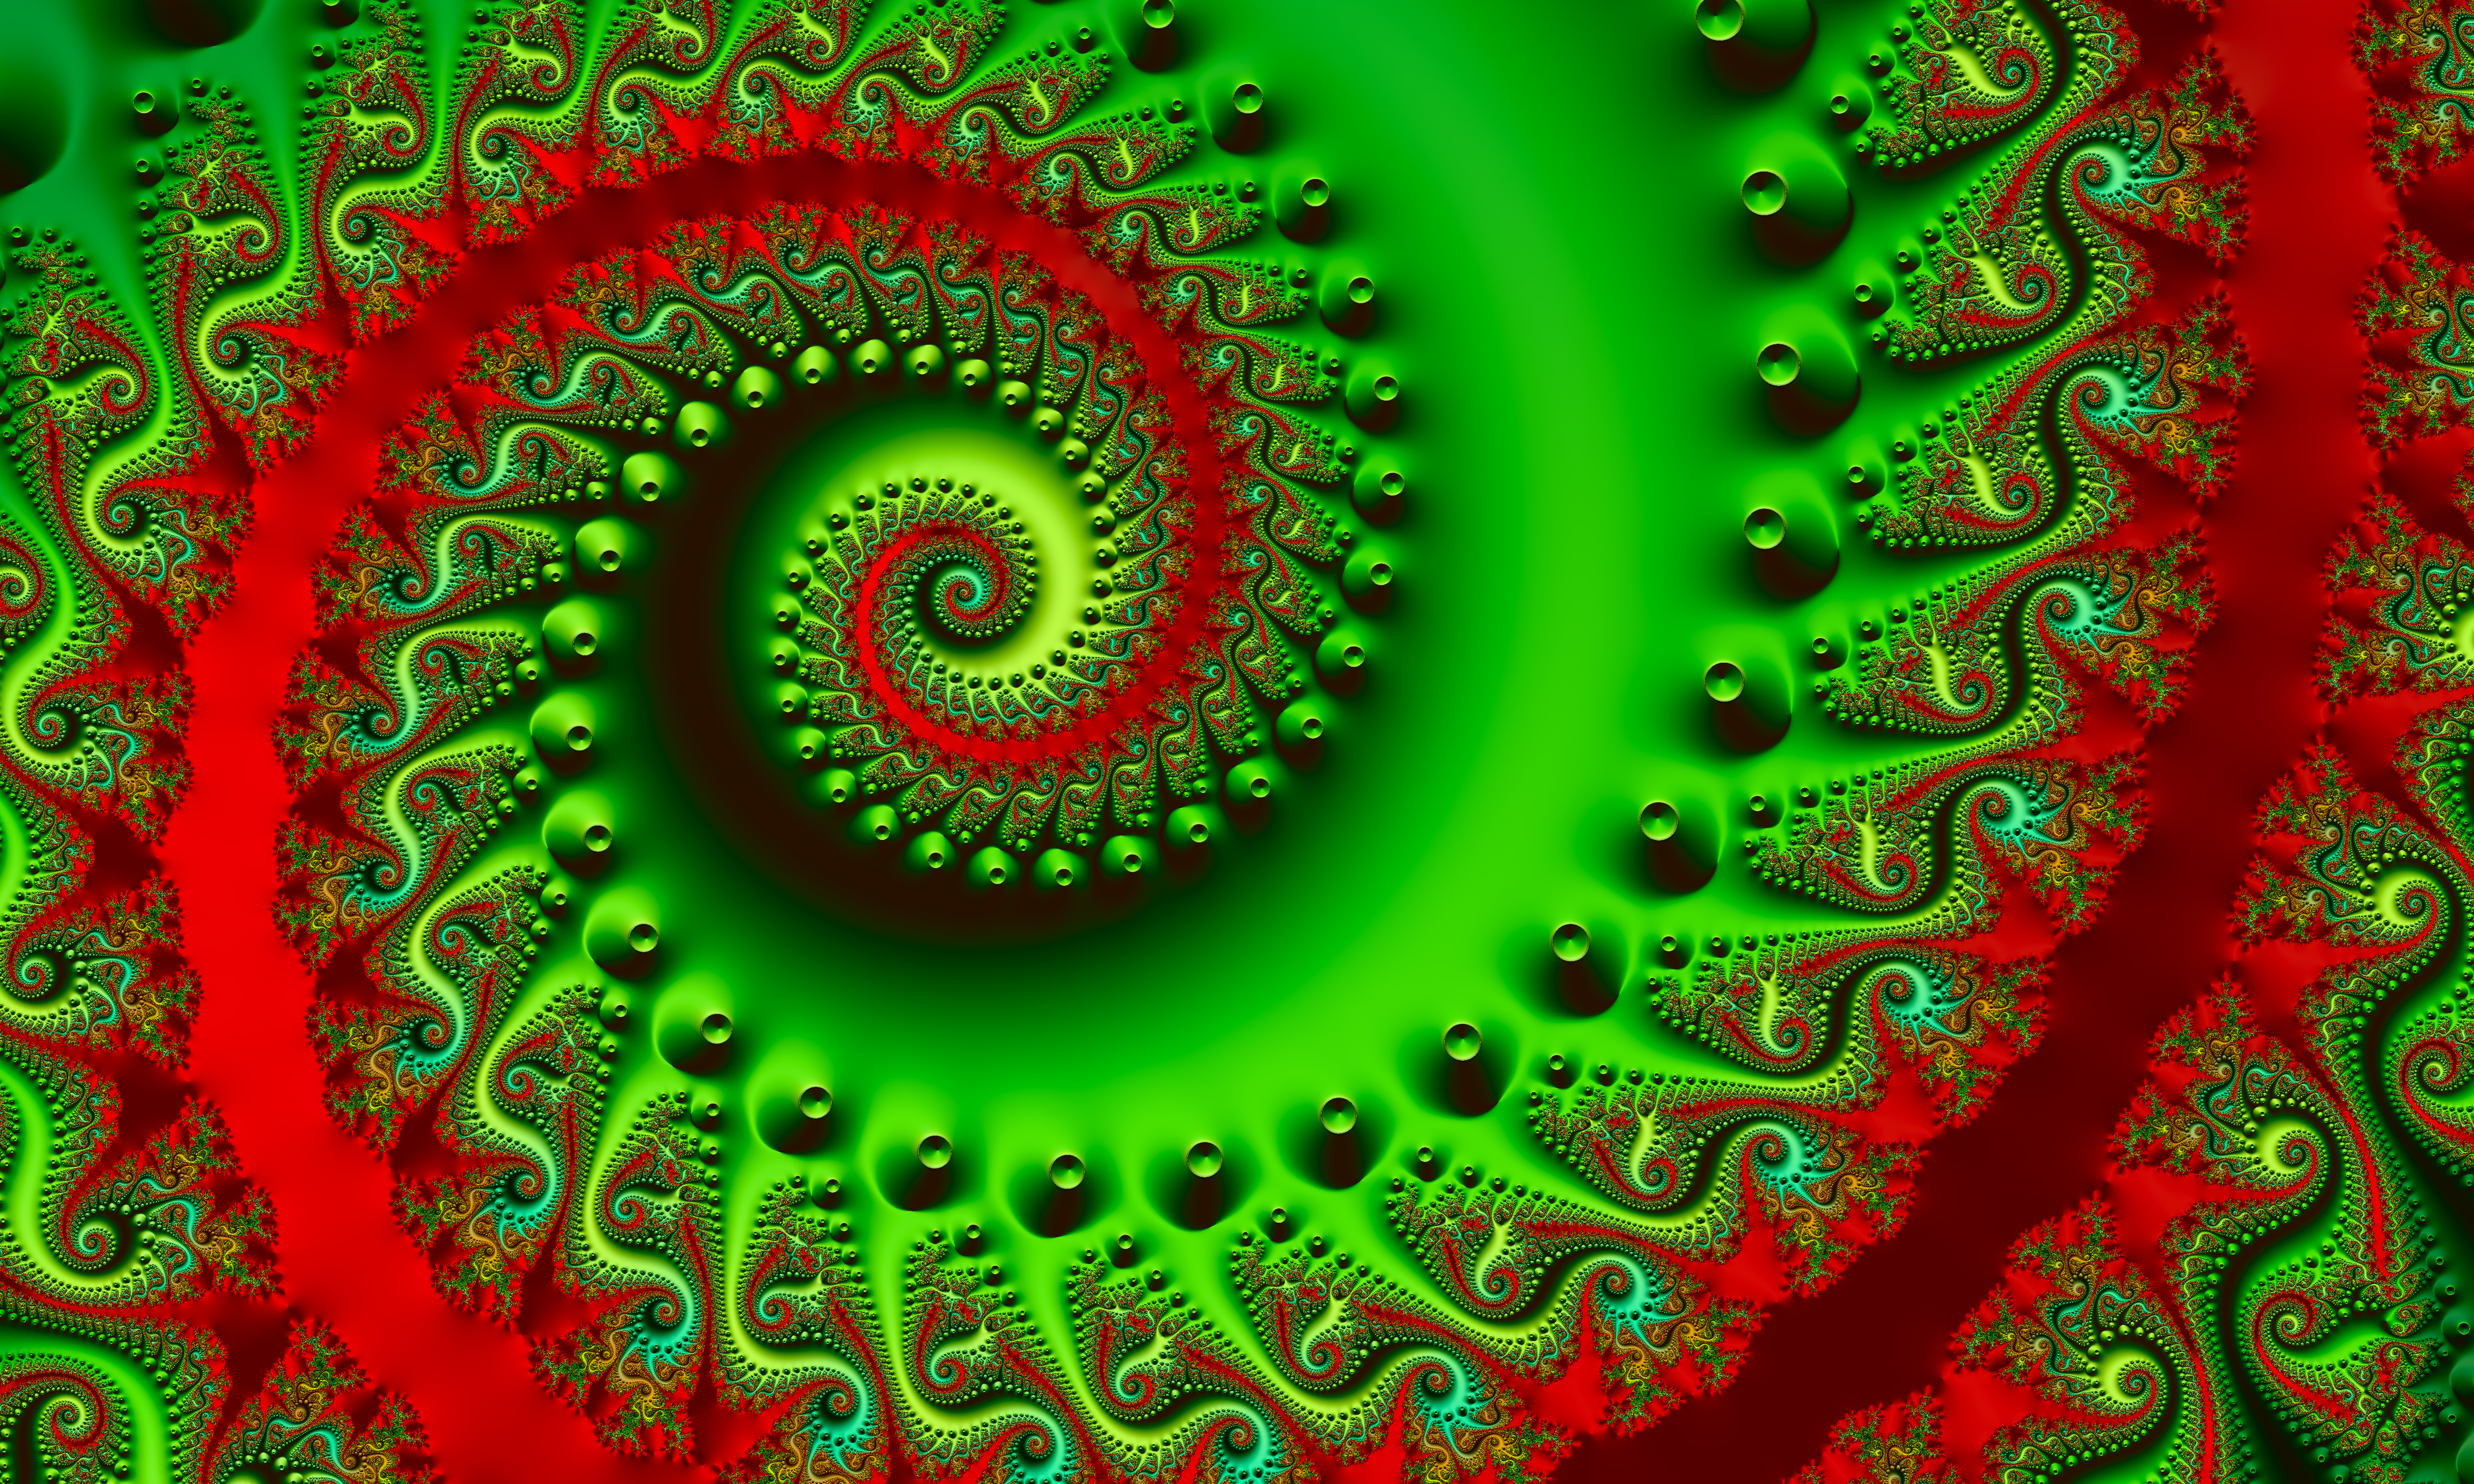 bright, spiral, 3d, motley, multicolored, fractal, swirling, involute